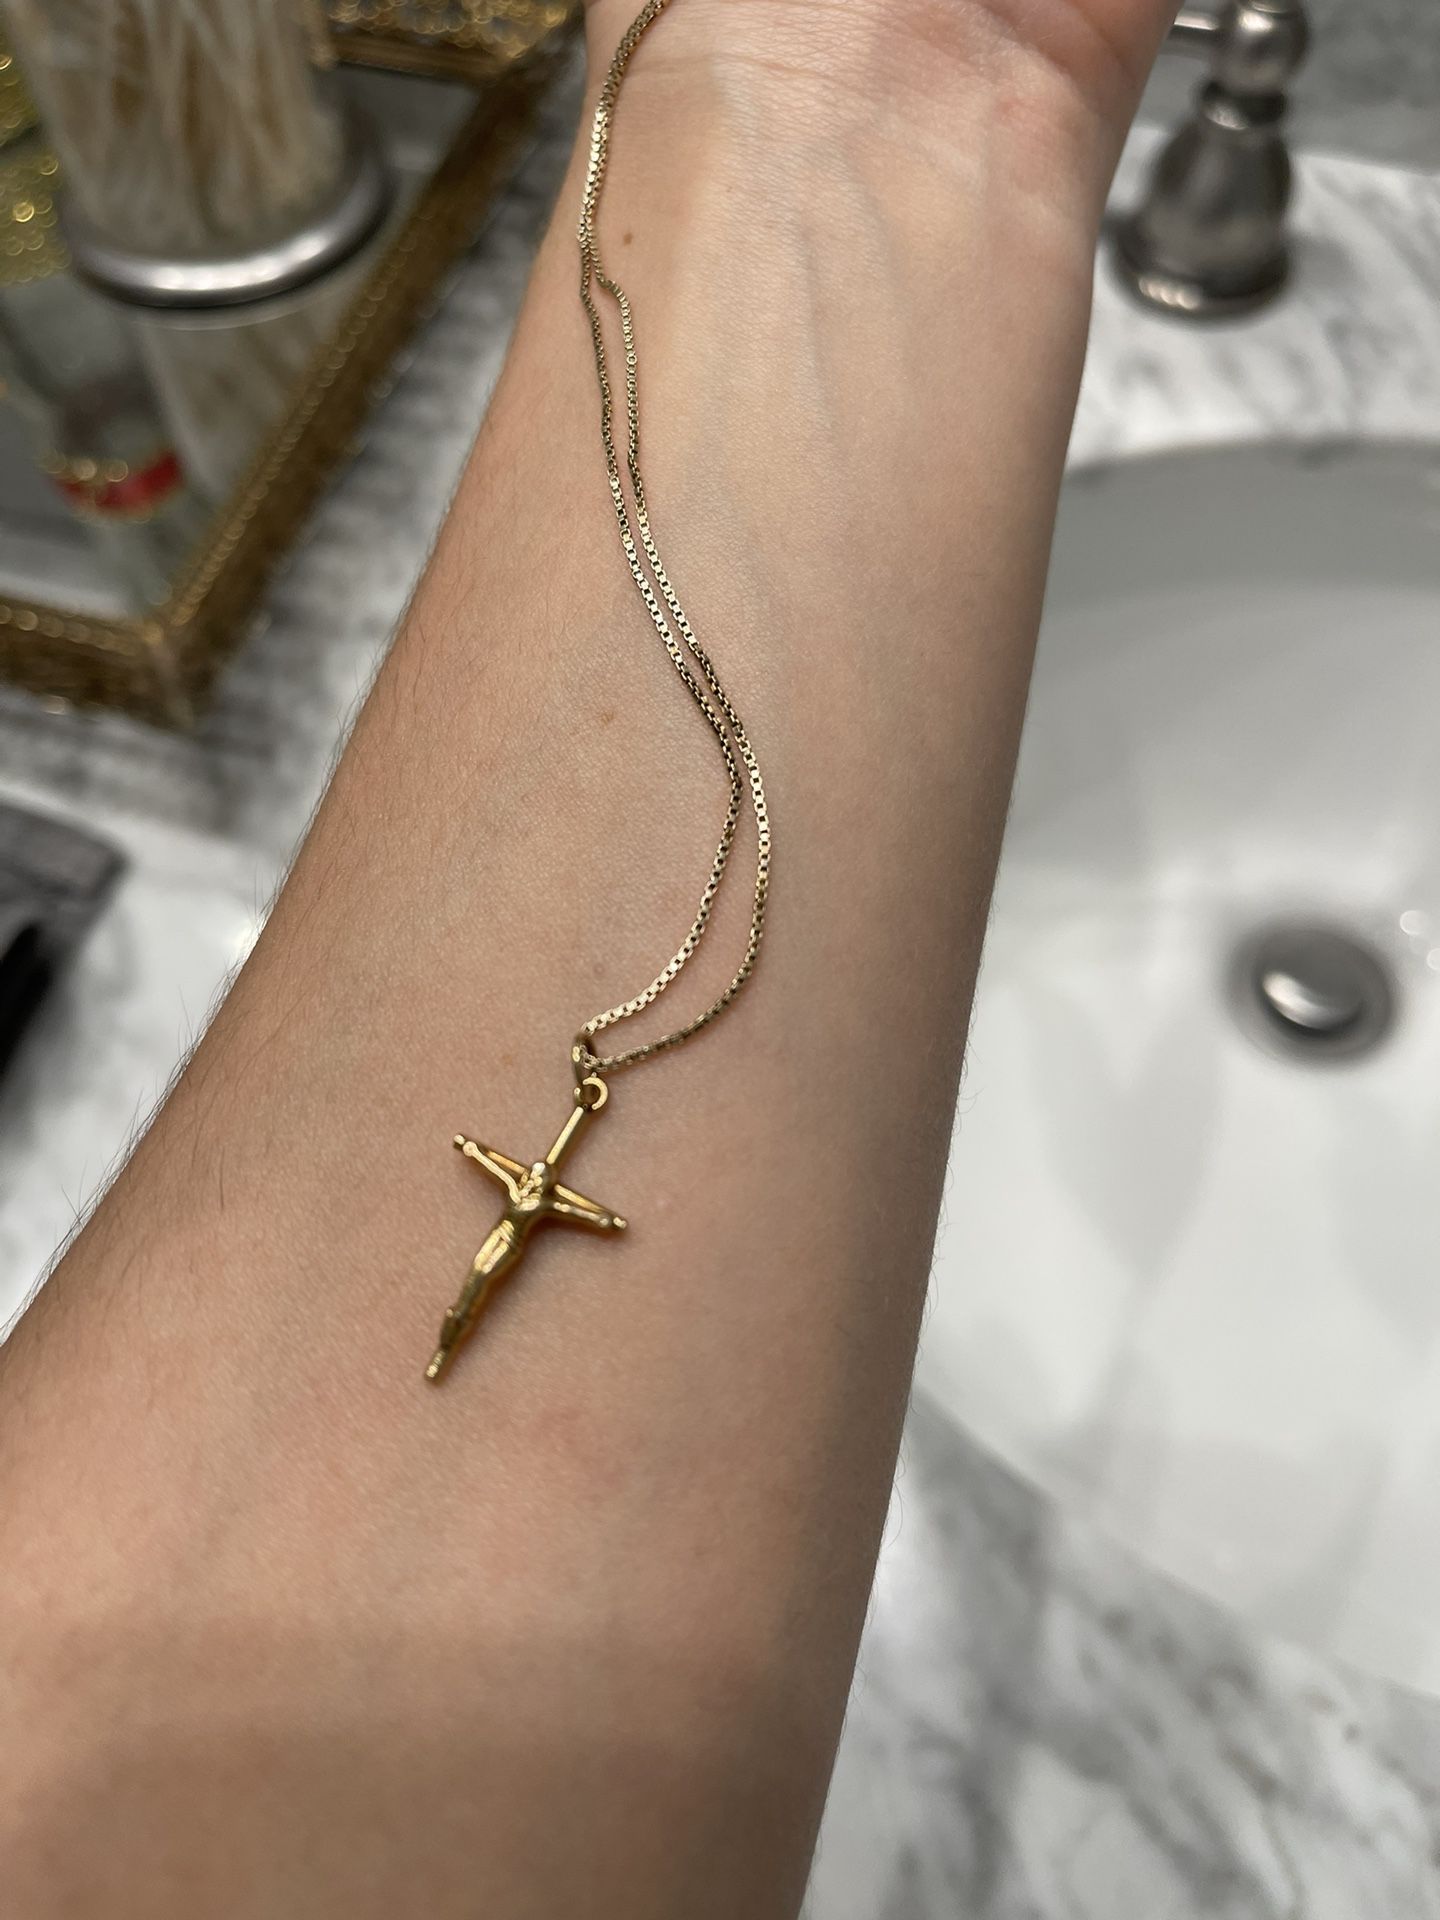 10 K Gold Necklace With Cross Pendant 